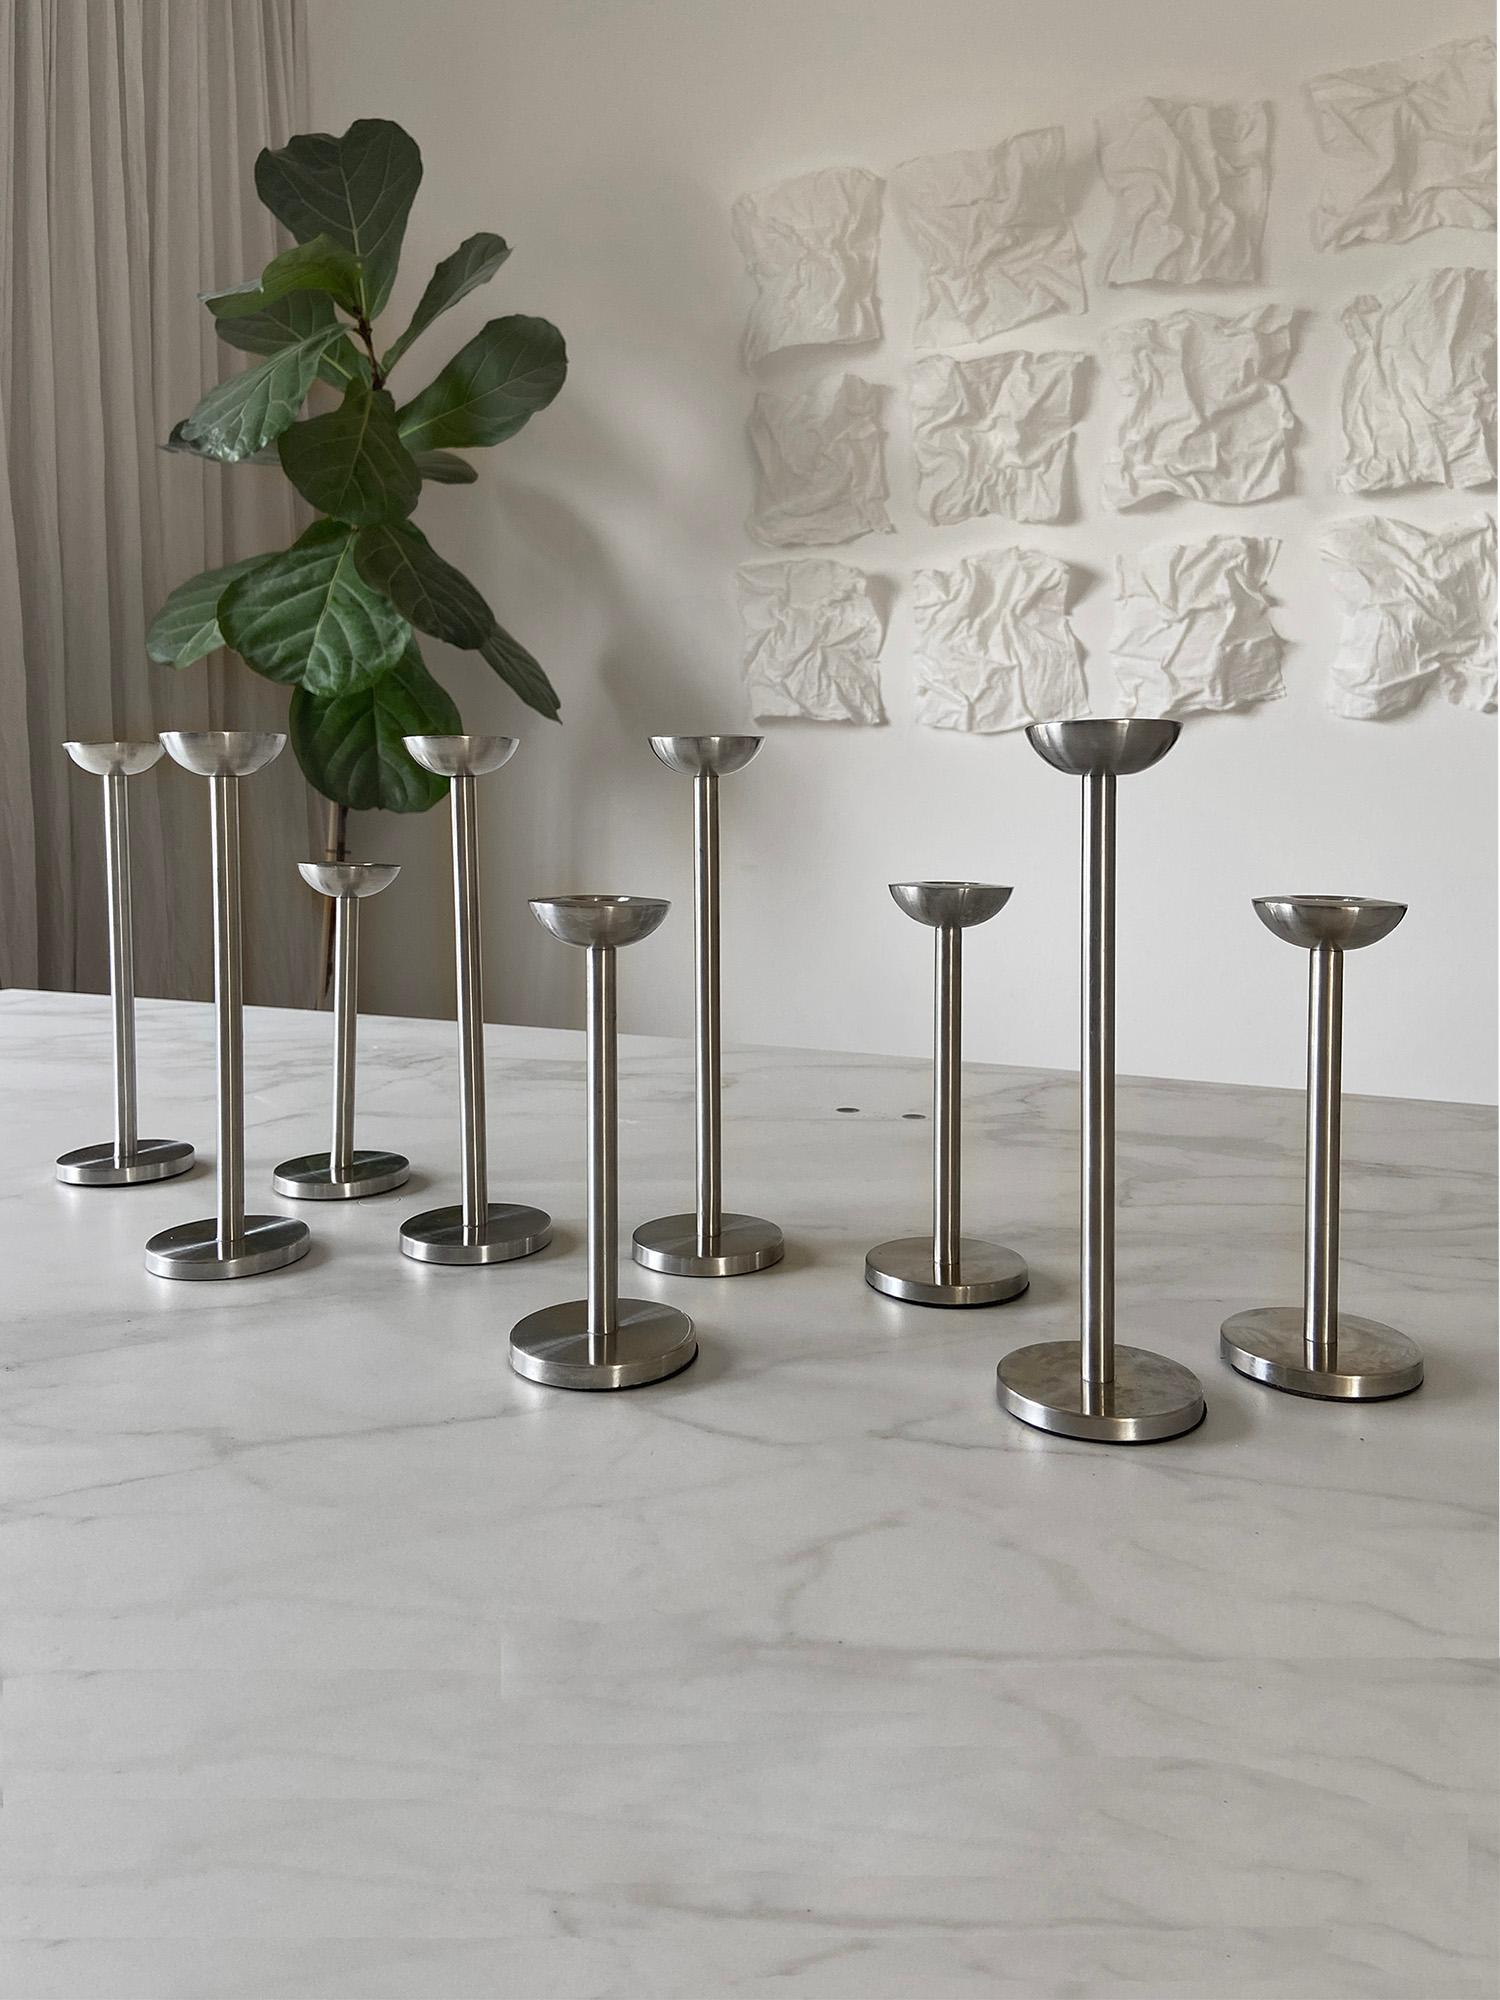 Welded German Stainless Steel Minimalist Design Candle Holder set of 9 For Sale